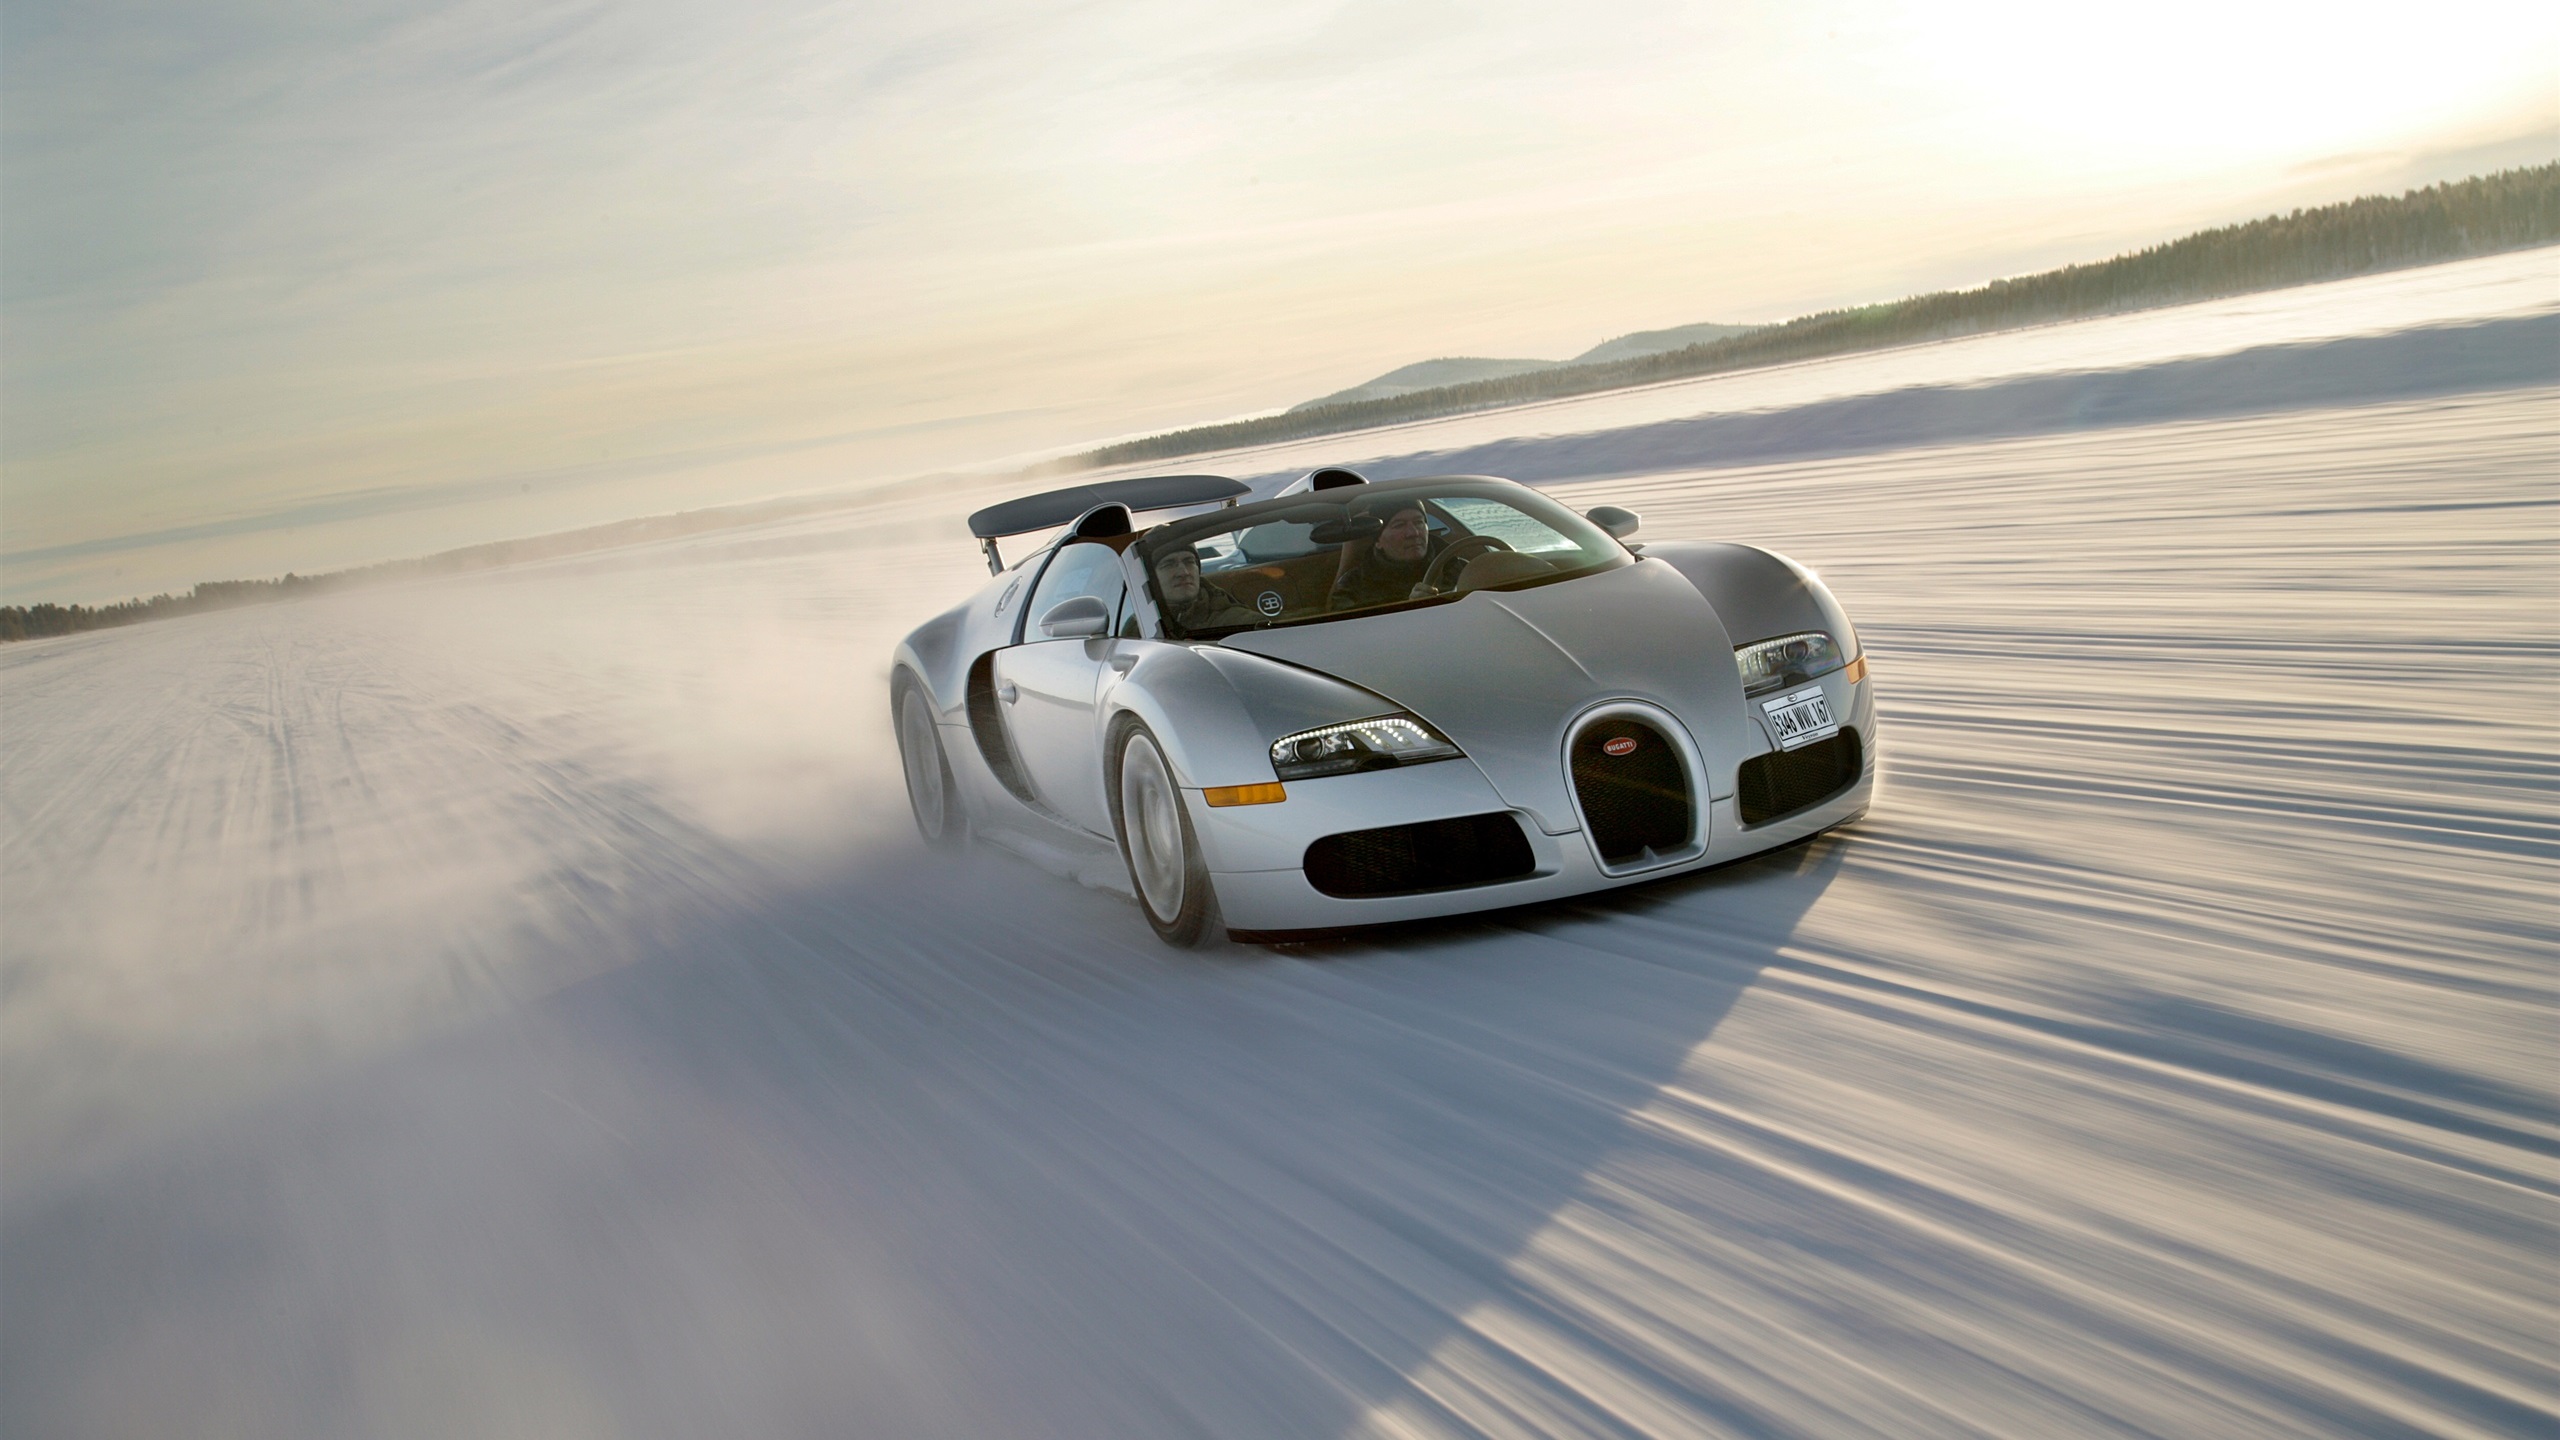 General 2560x1440 Bugatti people driving snow winter vehicle road speed-limit hills sky daylight sunlight Bugatti Veyron French Cars Volkswagen Group Hypercar car